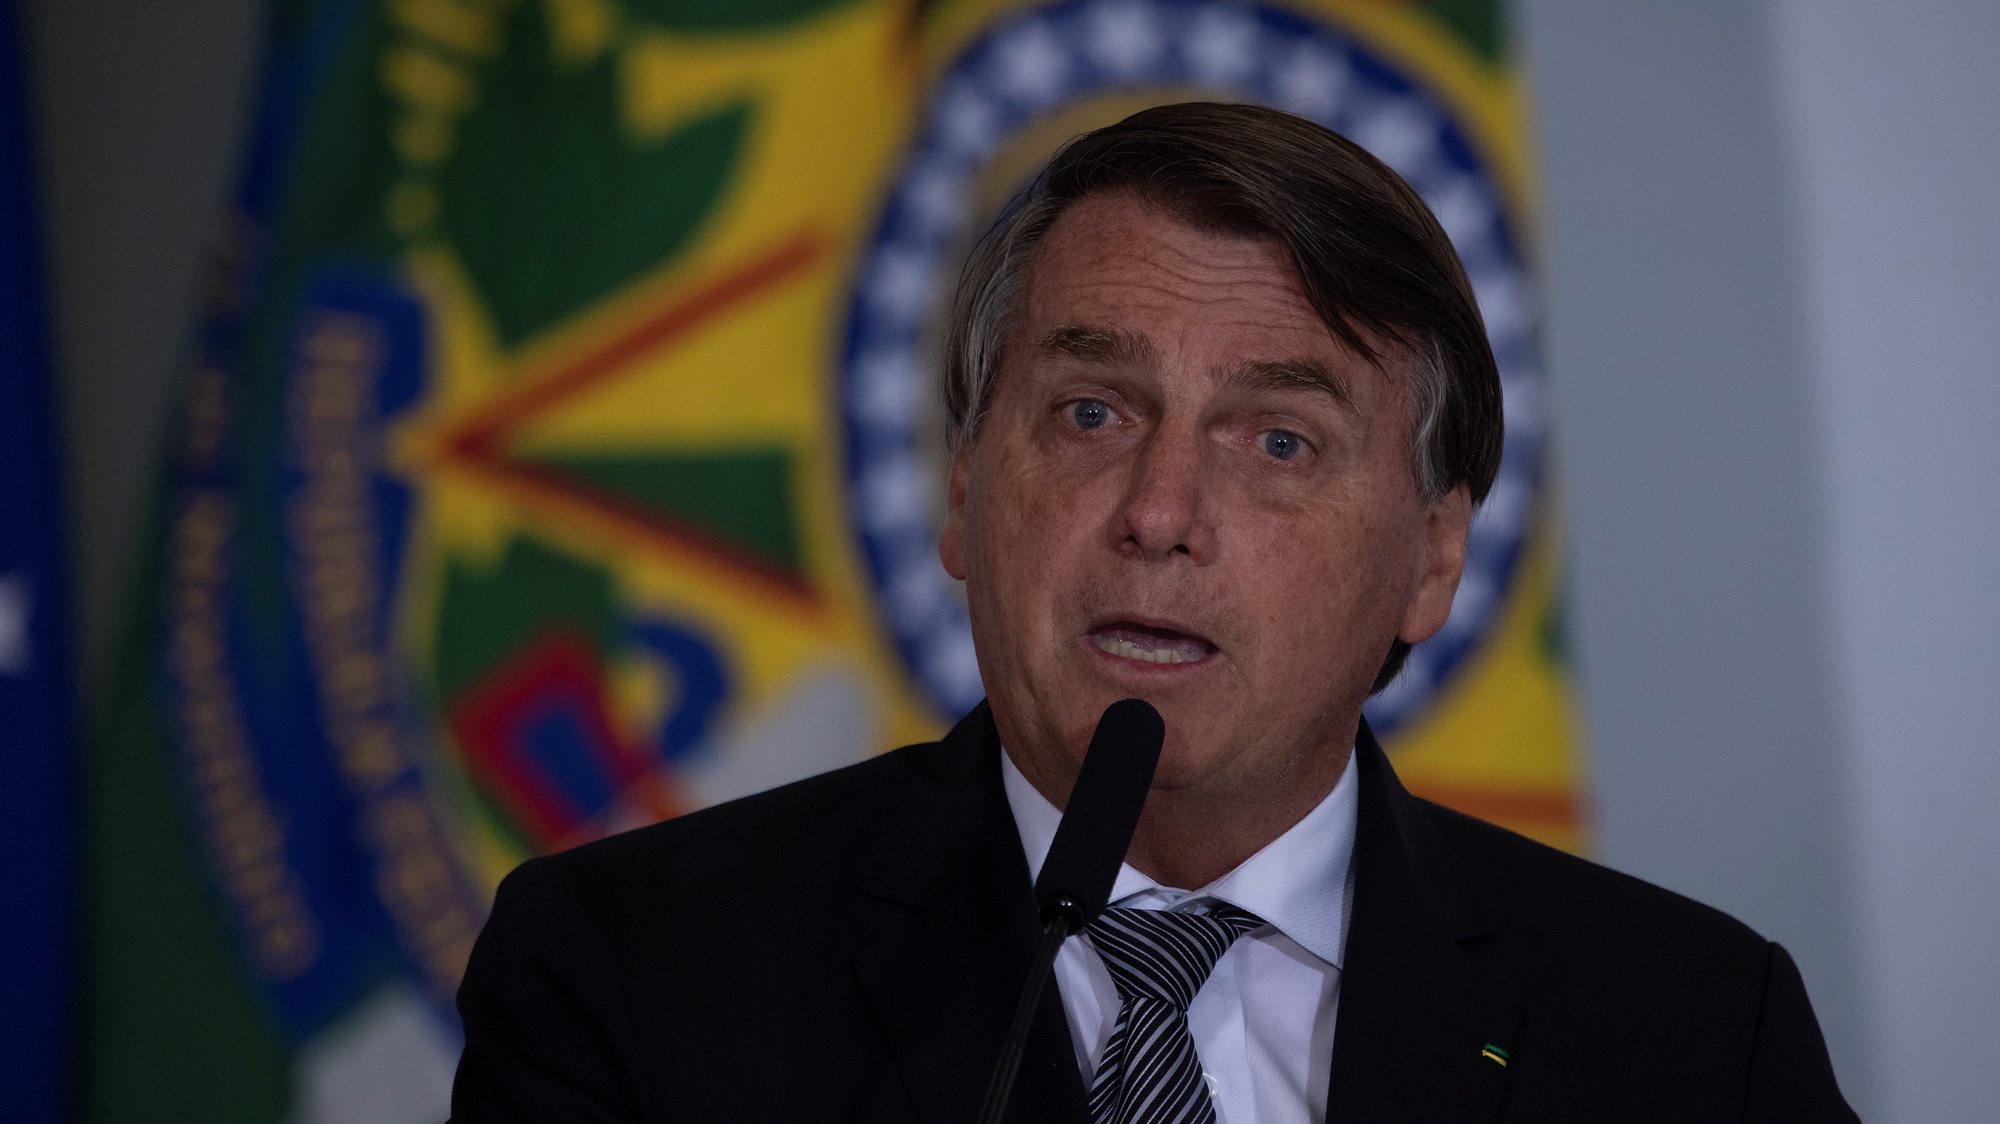 epa08871574 President of Brasil Jair Bolsonaro delivers a speech during the launching of the program &#039;Saude con agente&#039; (Health wit us) at Planalto Presidential Palace in Brasilia, Brazil, 08 December 2020. The program seeks better health indicators and basic attention to Brazilian people.  EPA/JoÃ©dson Alves